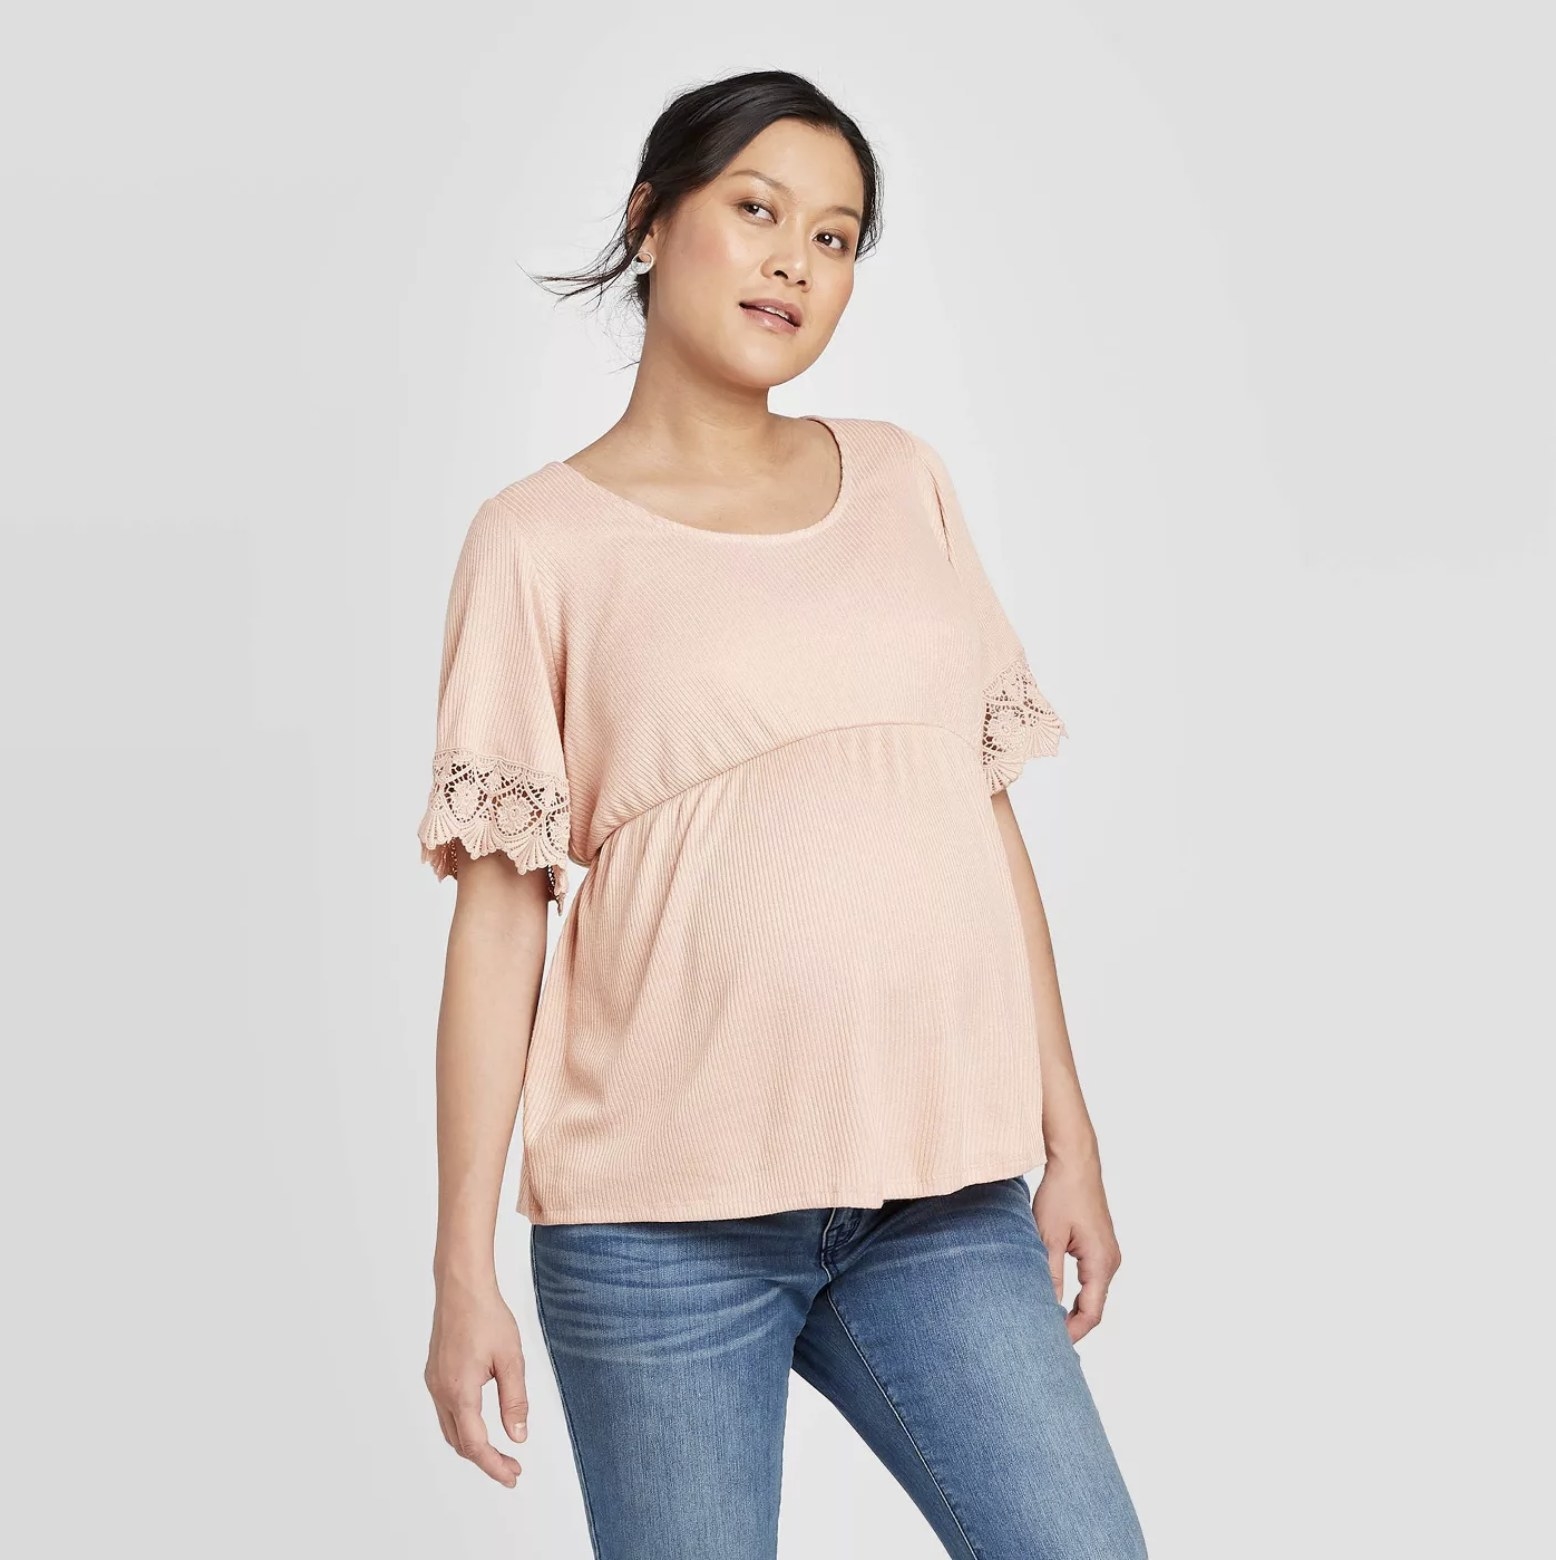 Model wears light pink short-sleeve ruffle top with blue jeans